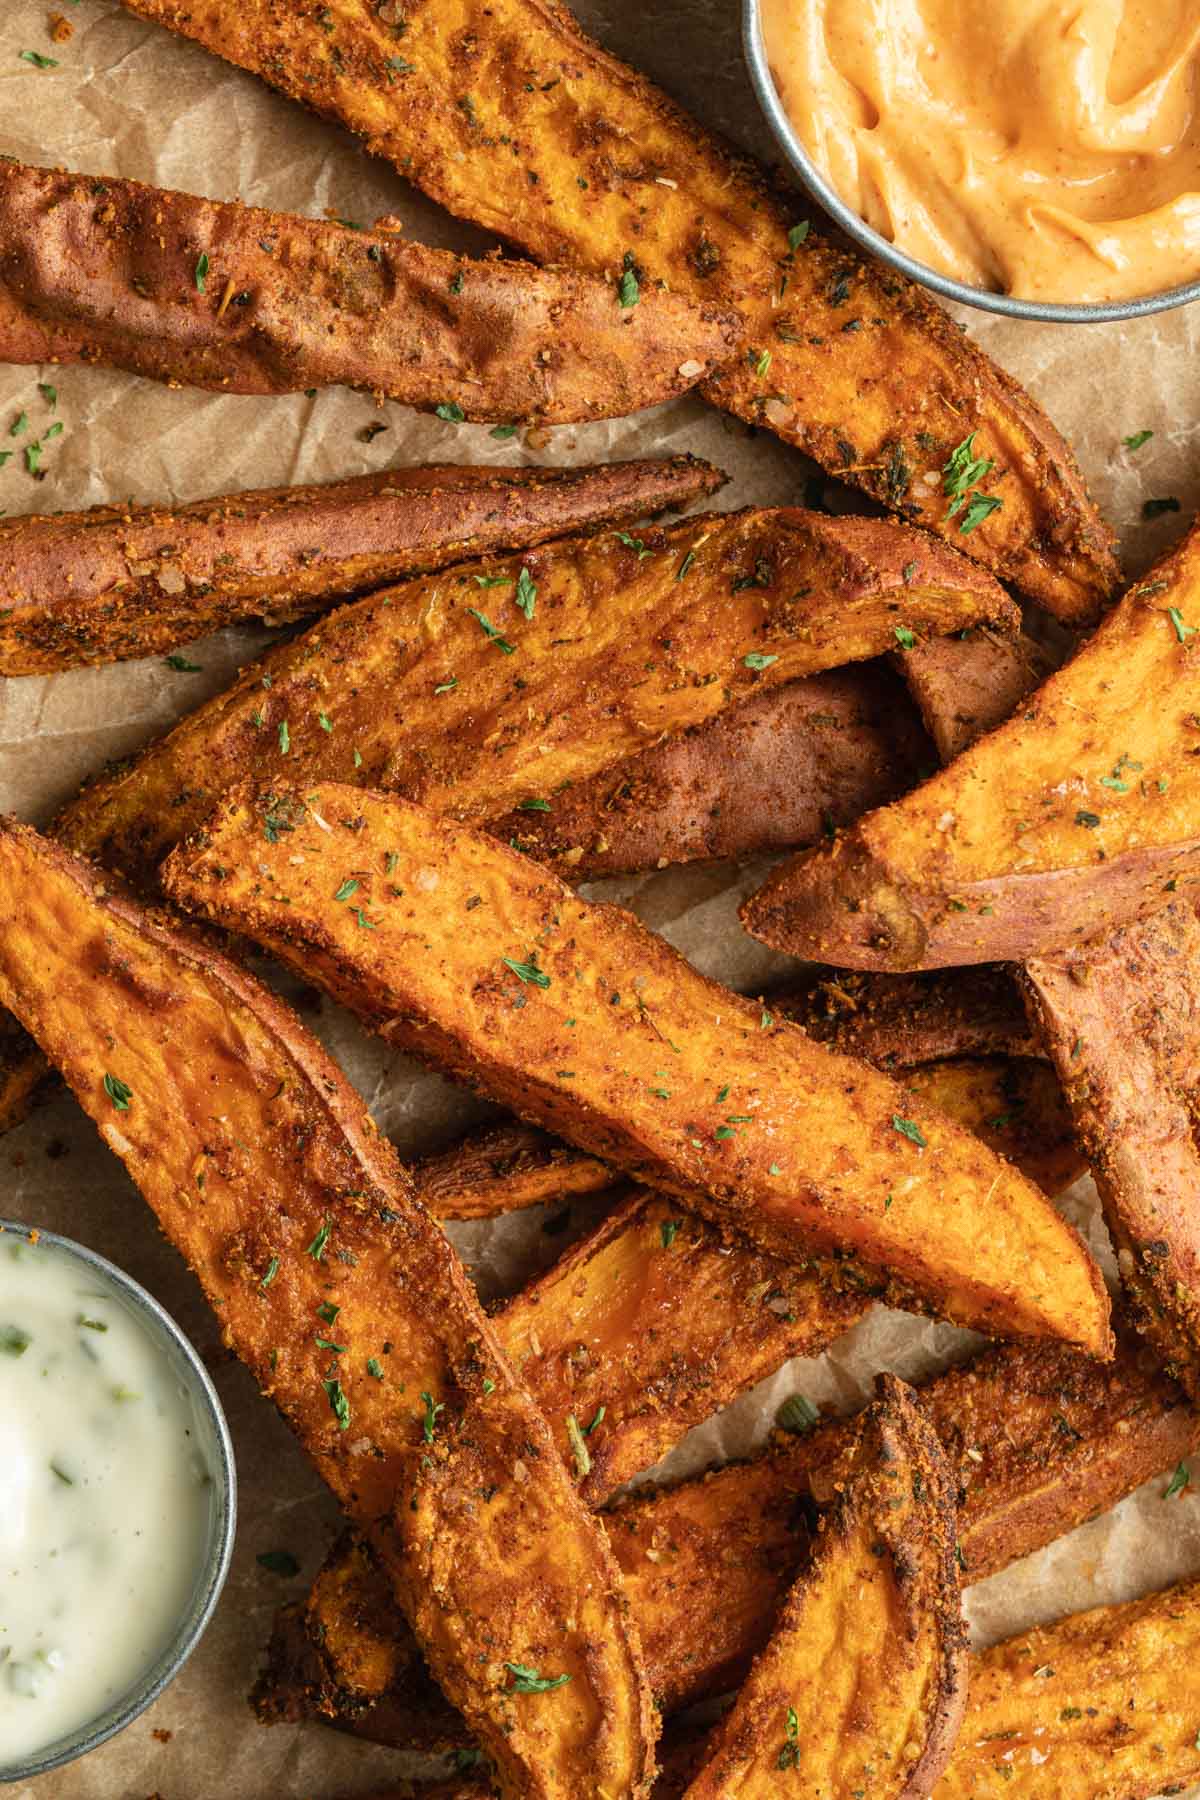 Overhead view of sweet potato wedge fries arranged on brown parchment paper.